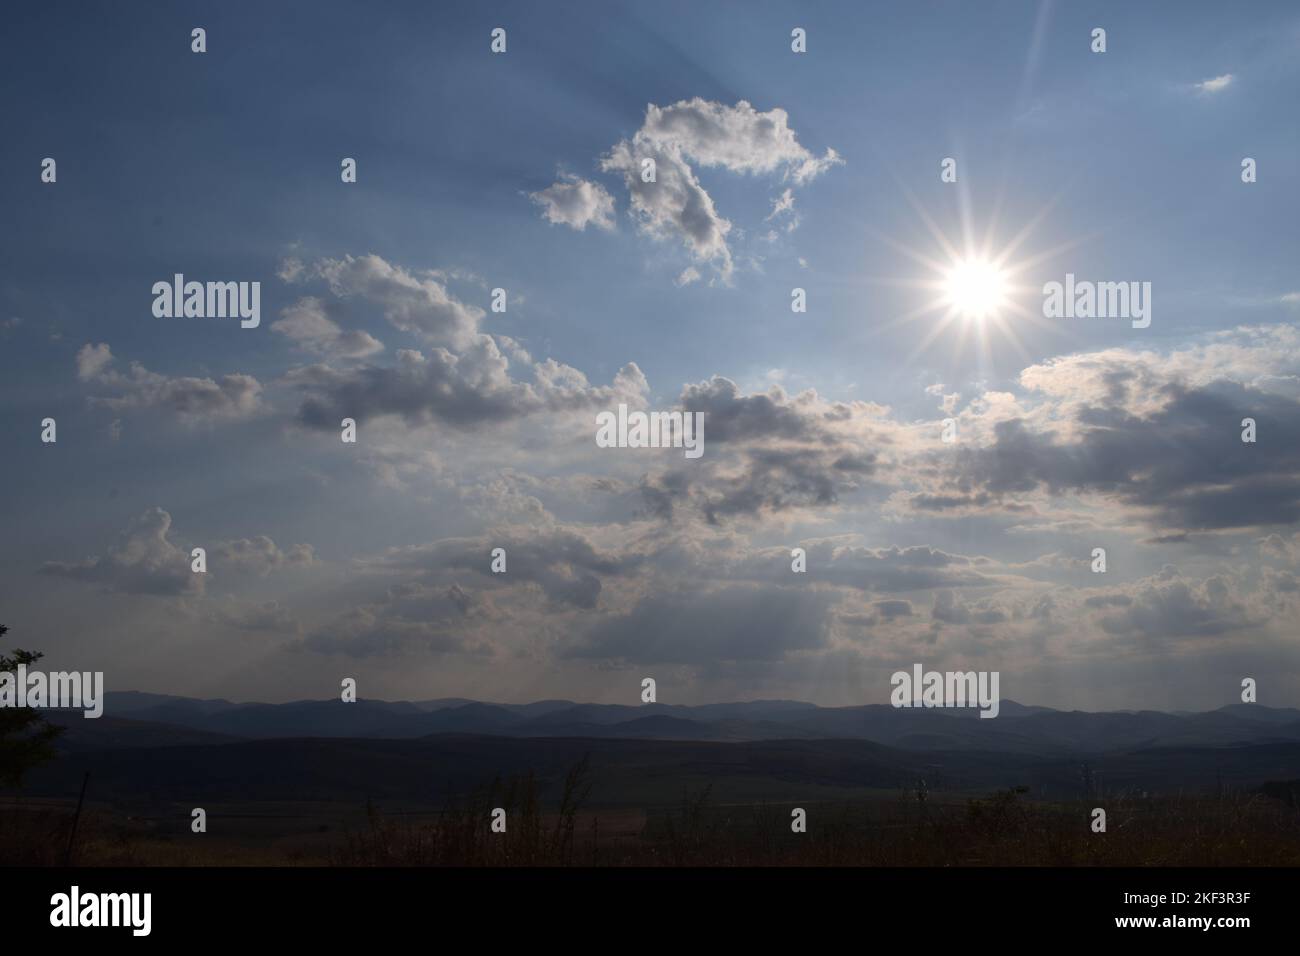 A photo surprising an amazing view near Cluj-Napoca, in which the sunrays are coming from behind the clouds. Stock Photo